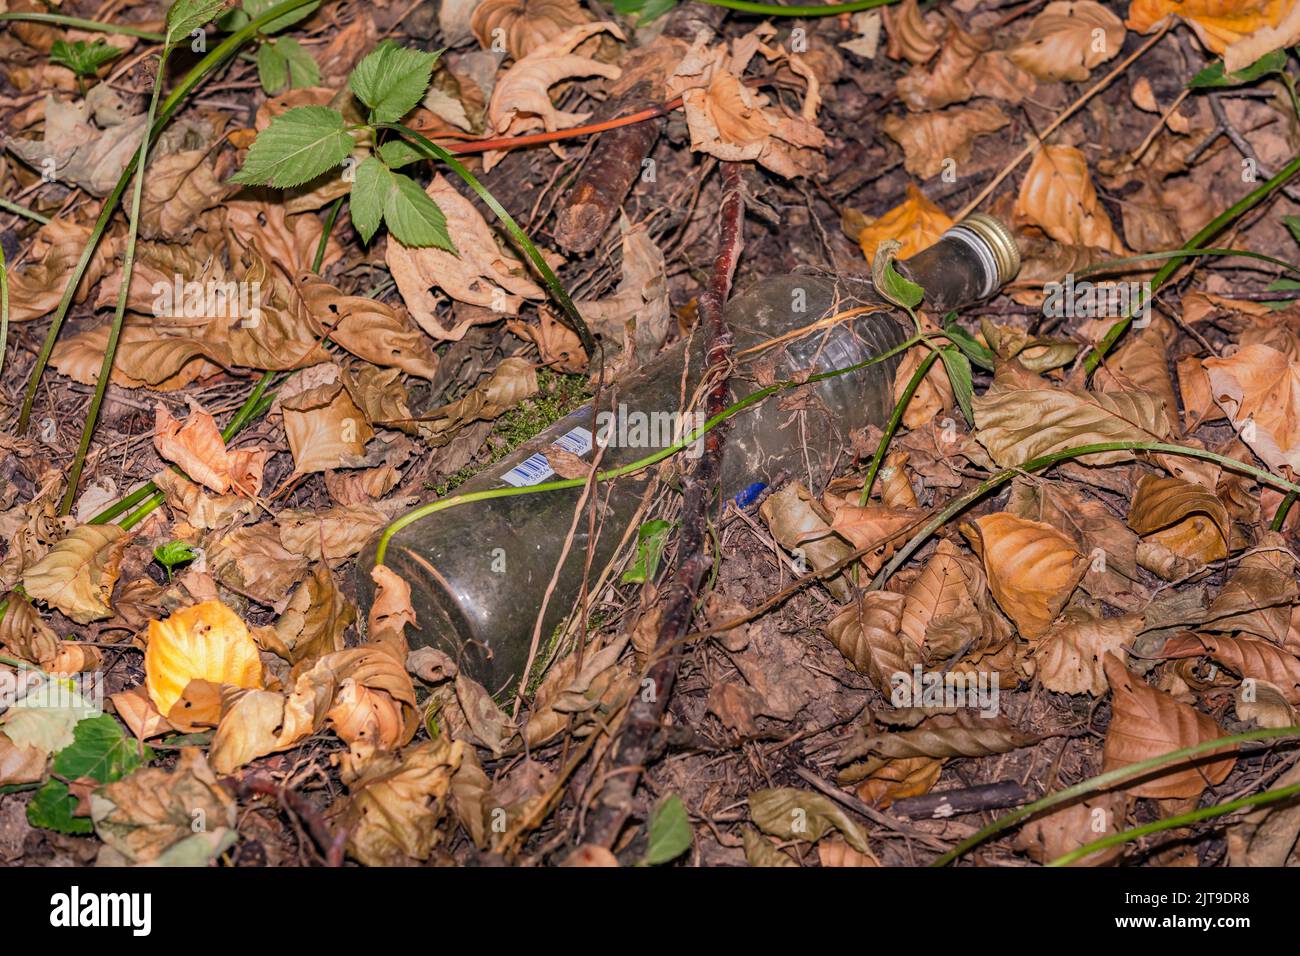 A glass bottle was thrown away in the forest, Odenwald, Germany Stock Photo